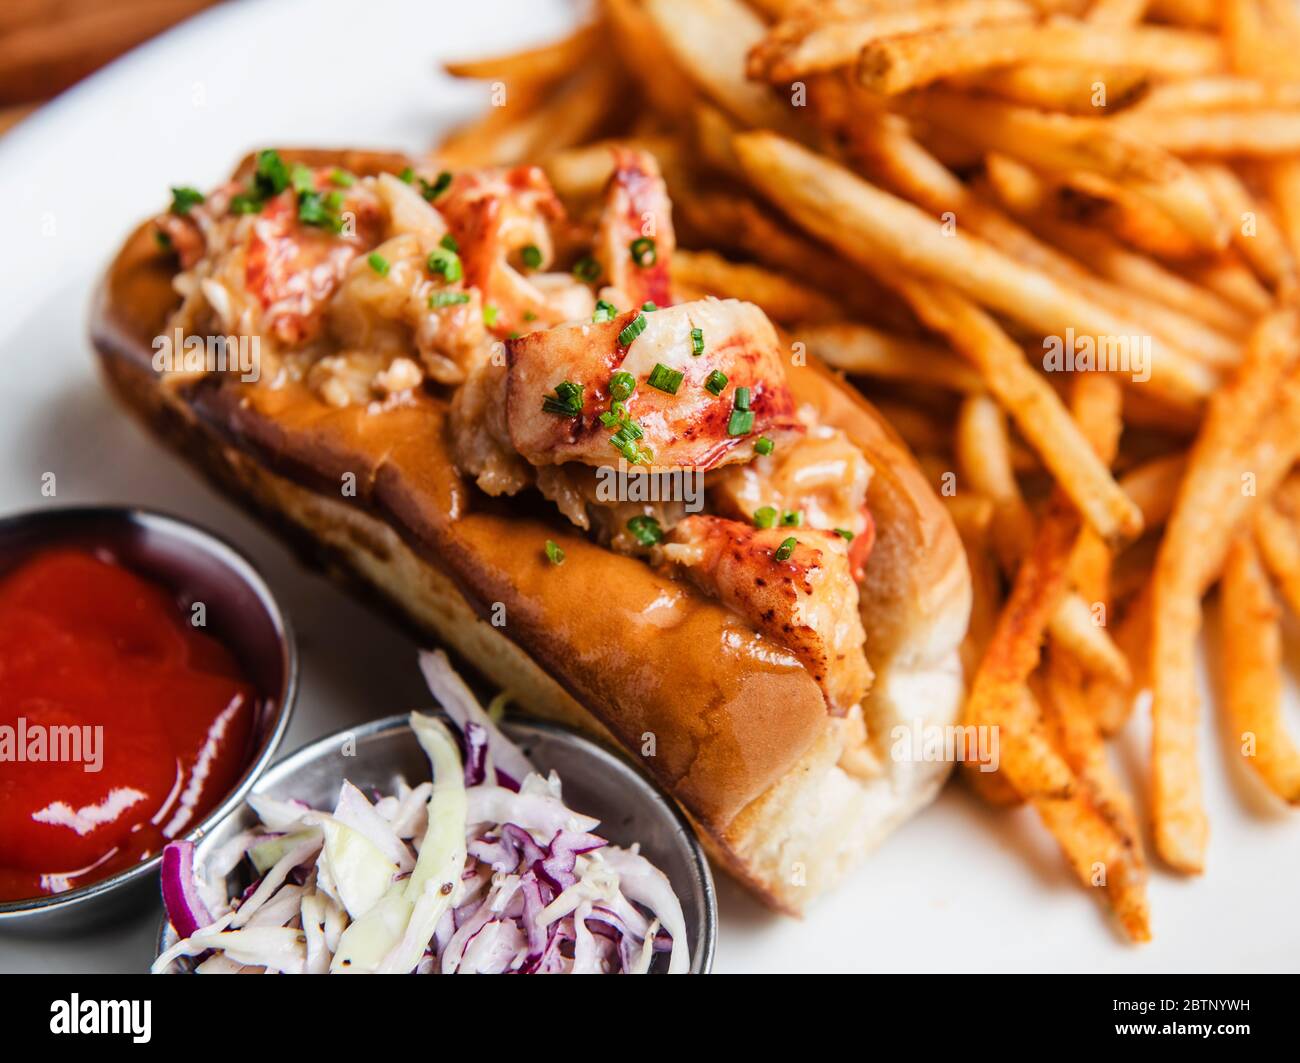 Lobster roll sandwhich with French Fries Stock Photo